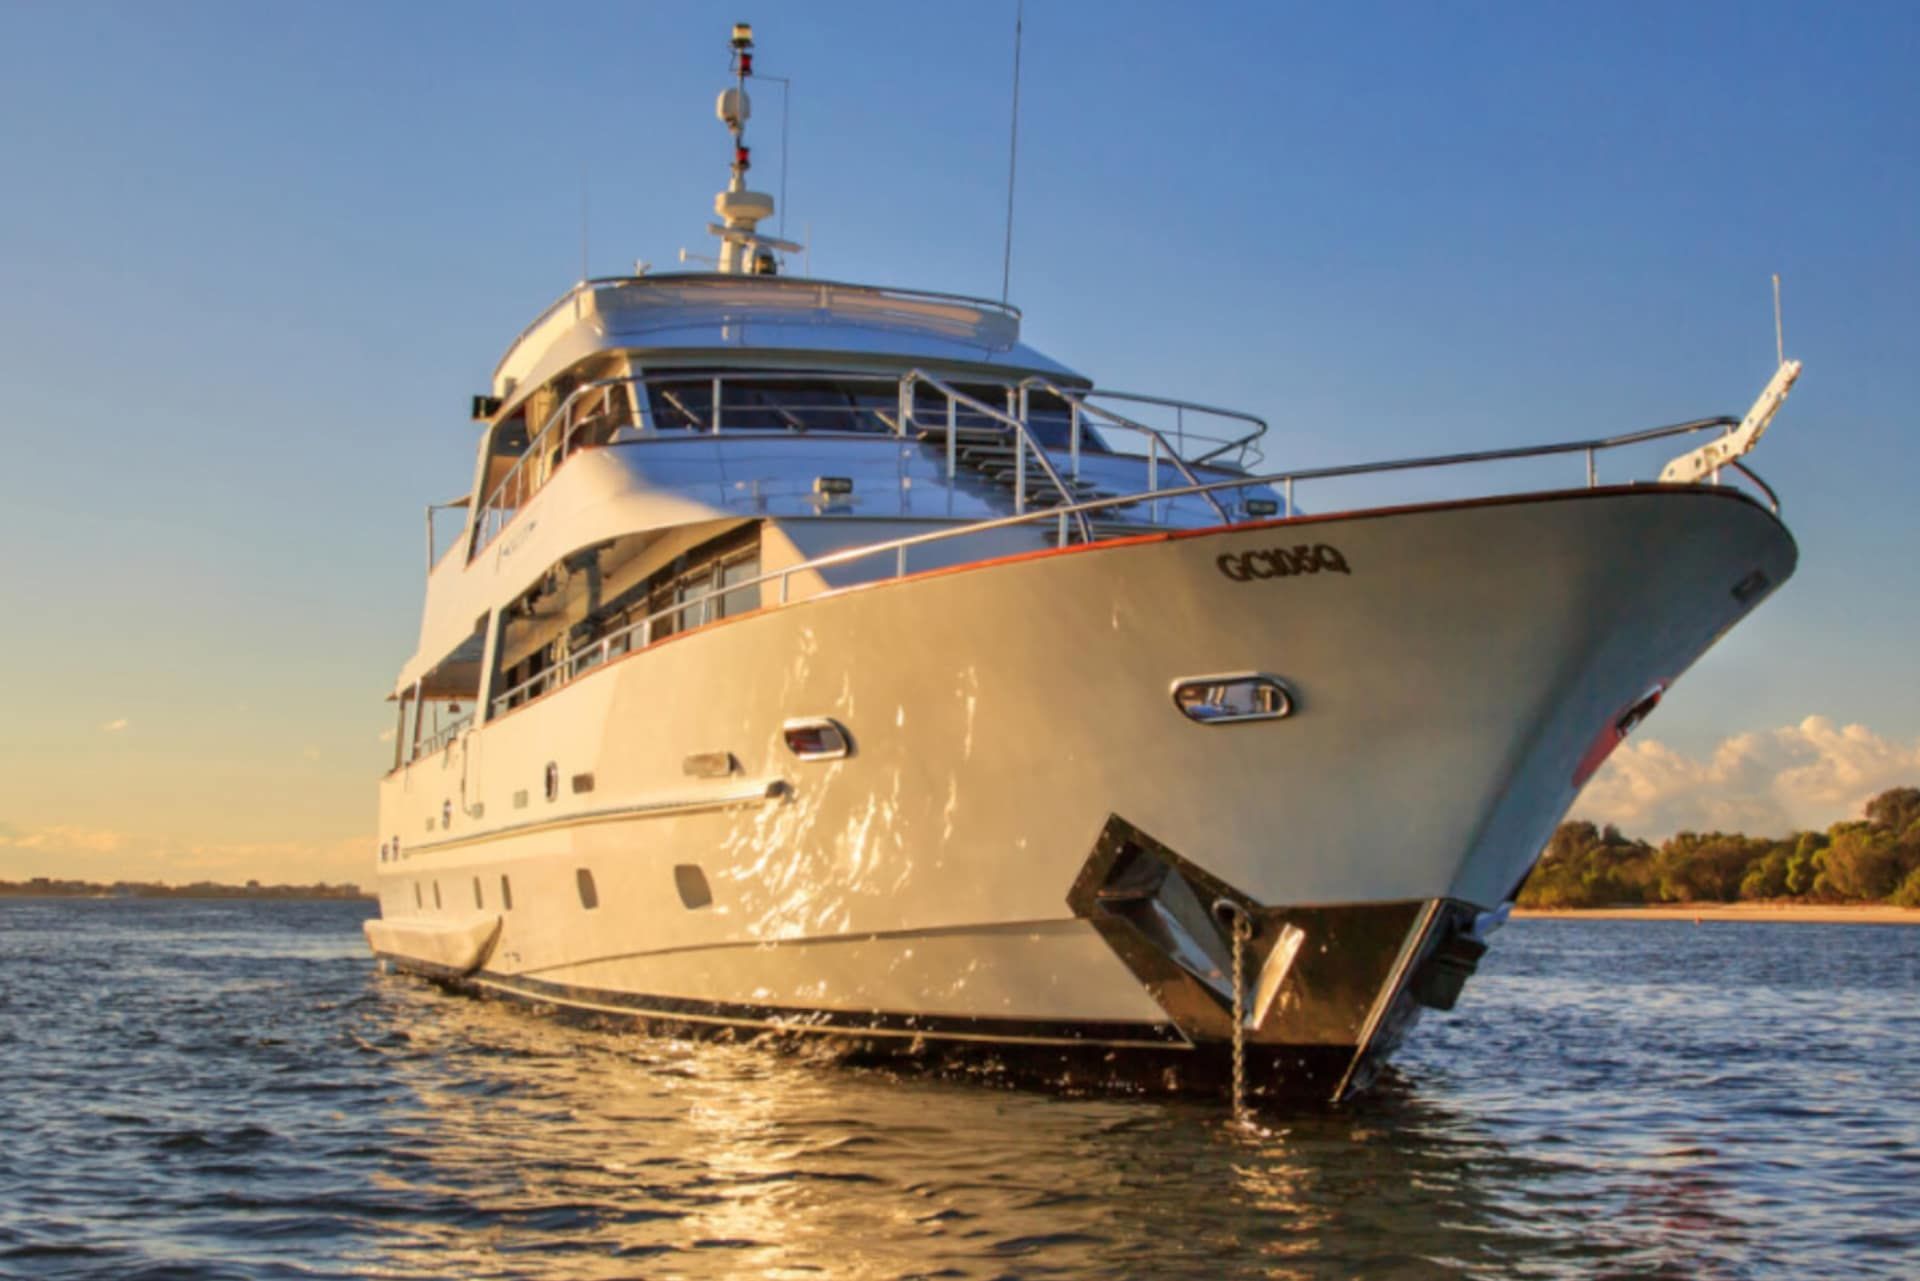 SEA RAES | From $2,000 Per Hour | 34 Guests